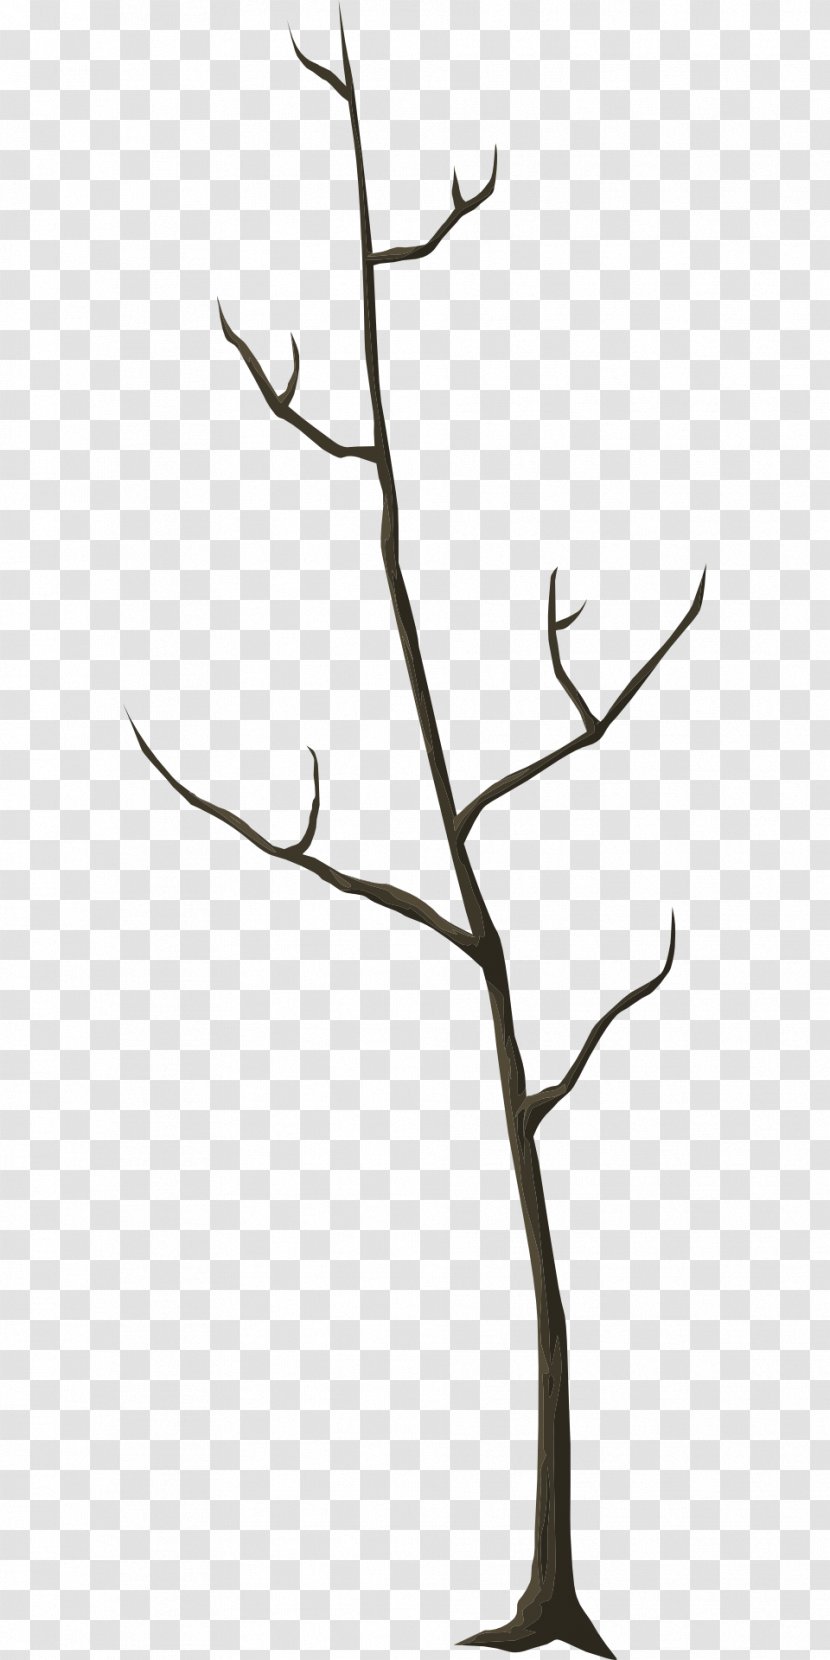 Twig Leaf Tree Trunk Branch - Botany - Environment Winter Transparent PNG